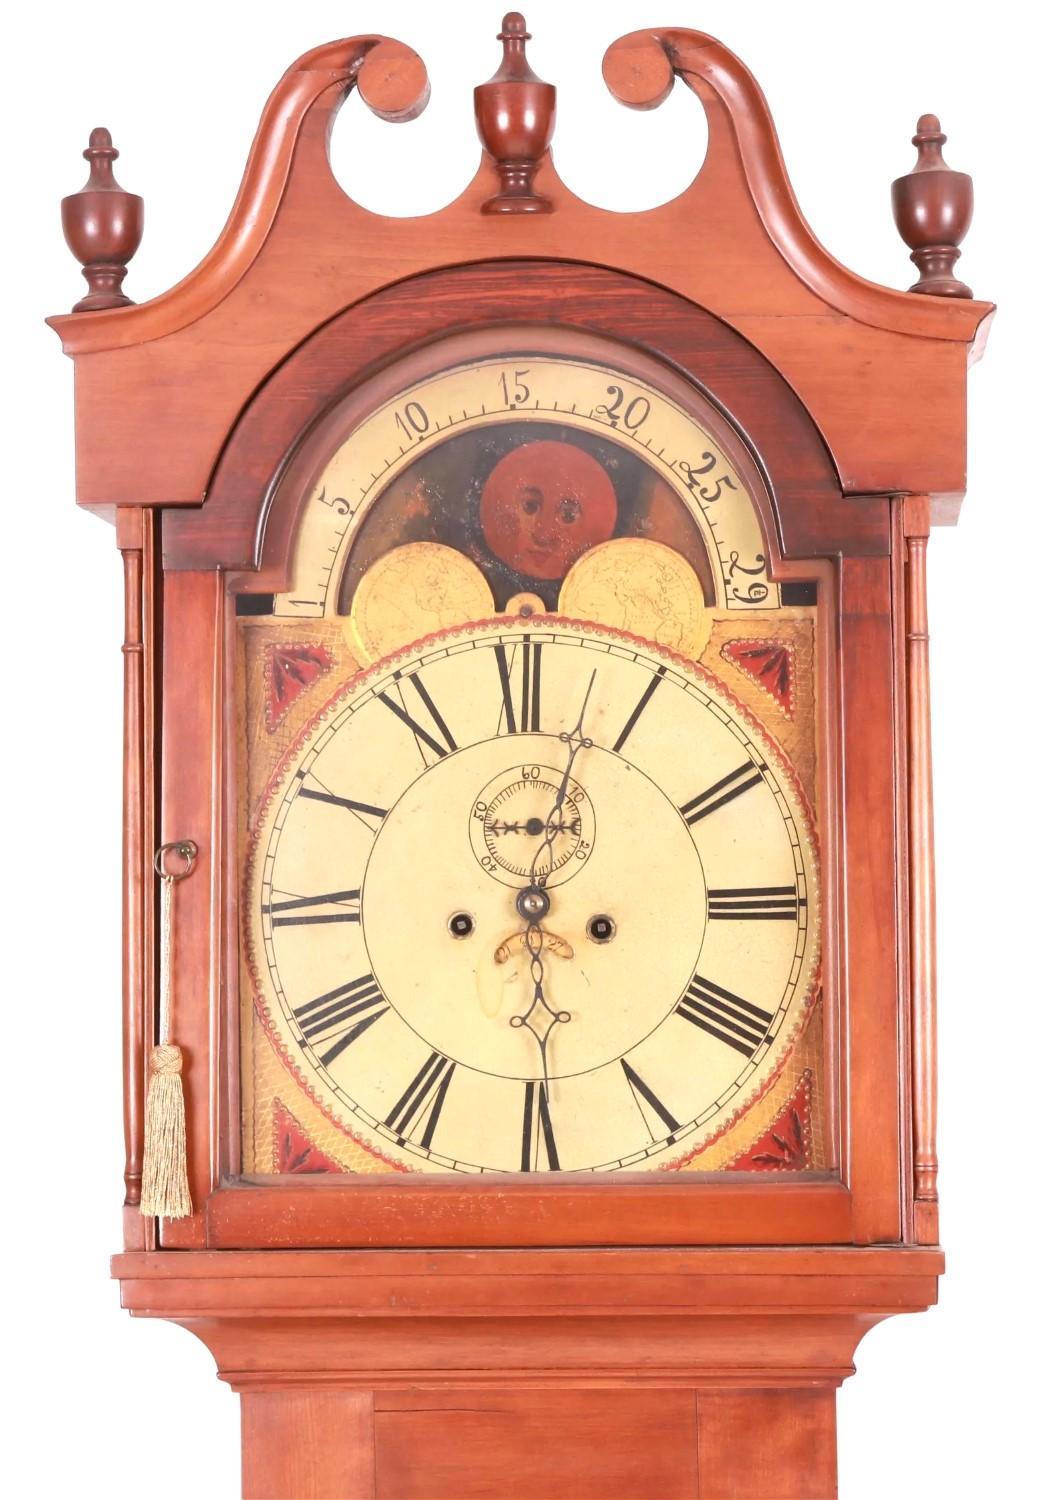 An early 19th century American tall-case clock with brass 8-day movement, the face having a moon-phase dial painted with ships and other scenes. The cherrywood case having cove moldings at the base, chamfered corners with lamb's tongue terminals, a